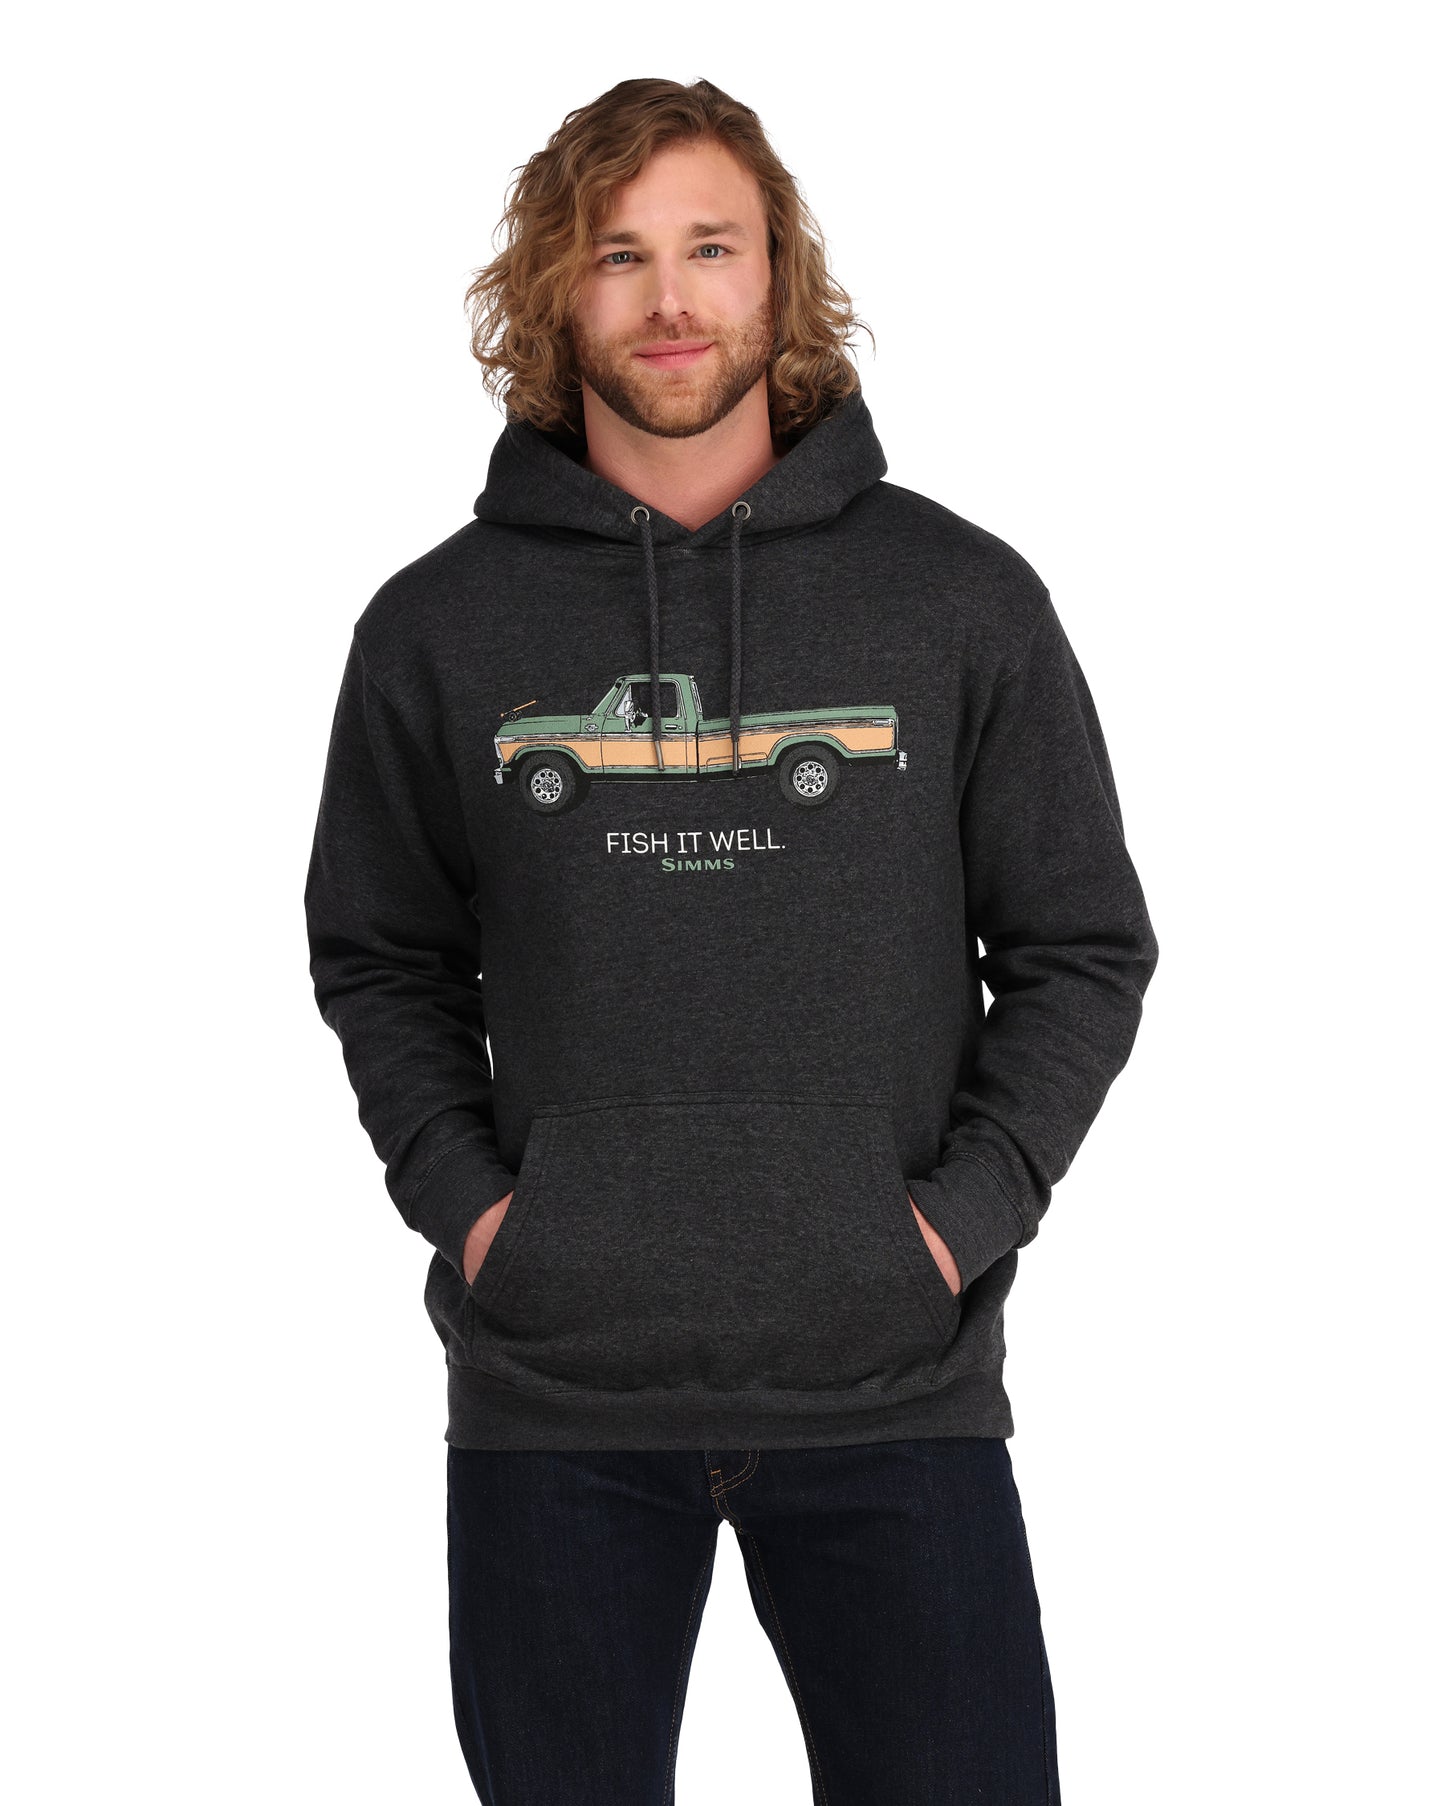 Fish-It-Well-250-hoody-charcoal-heather-on body-front -rollover